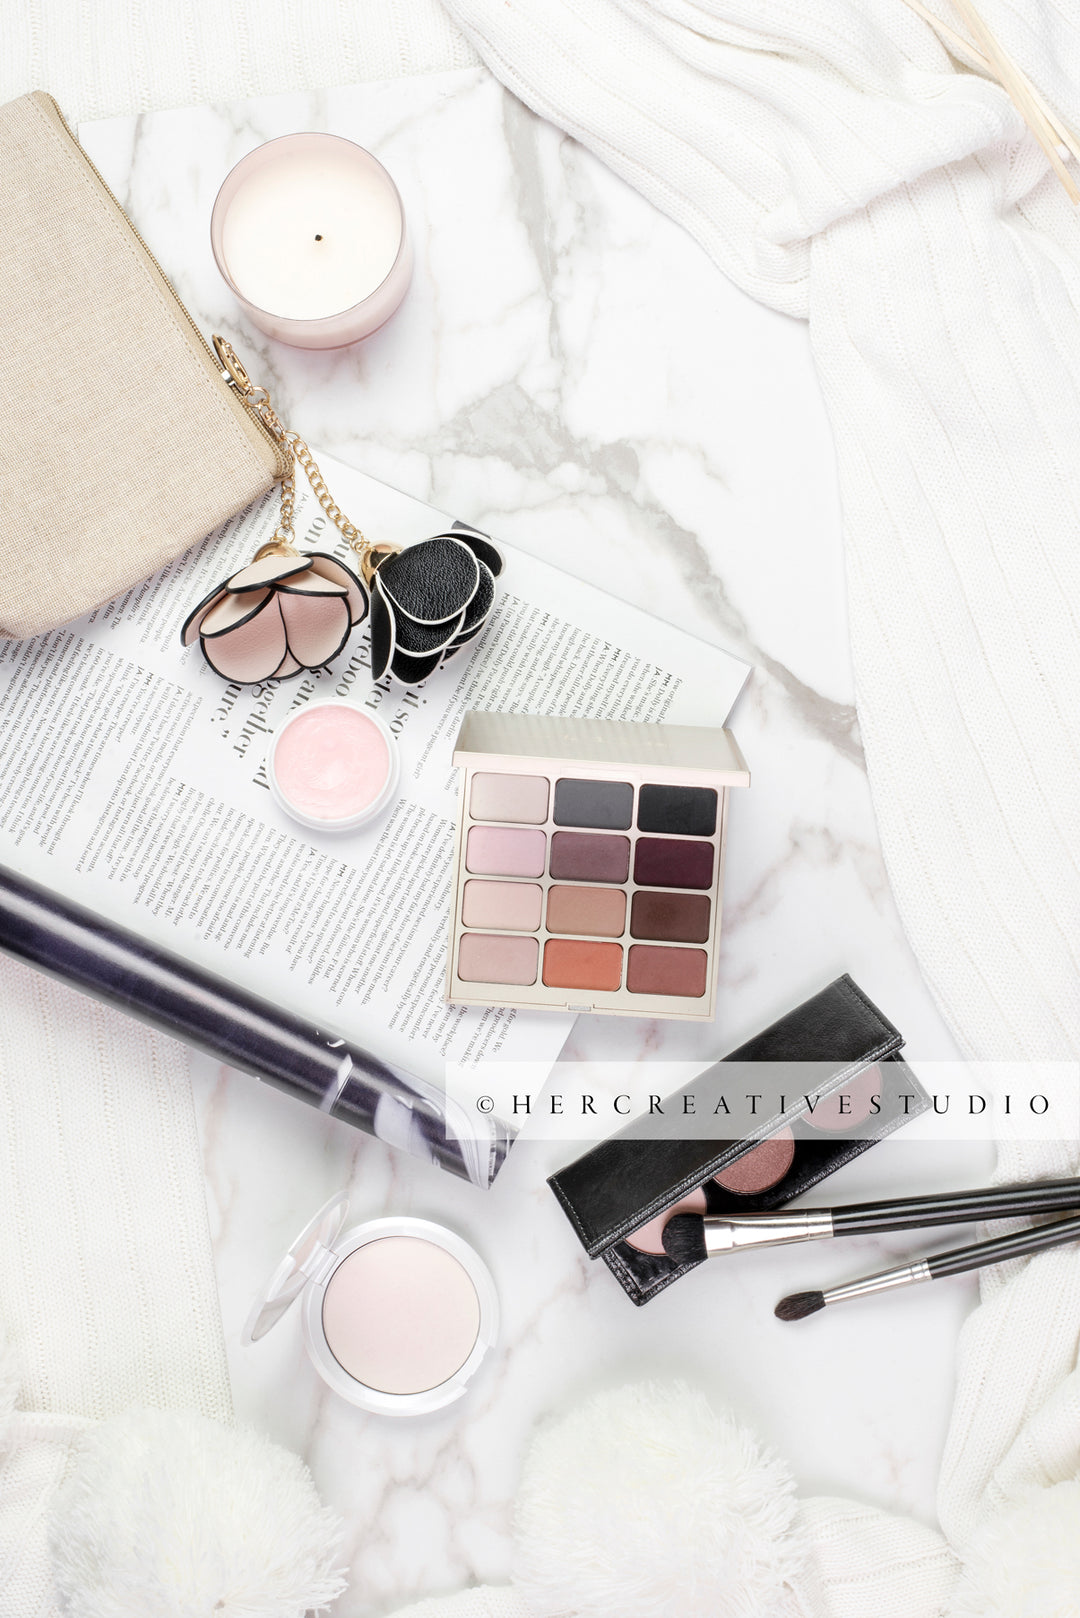 Makeup & Candle on Marble Table, Styled Stock